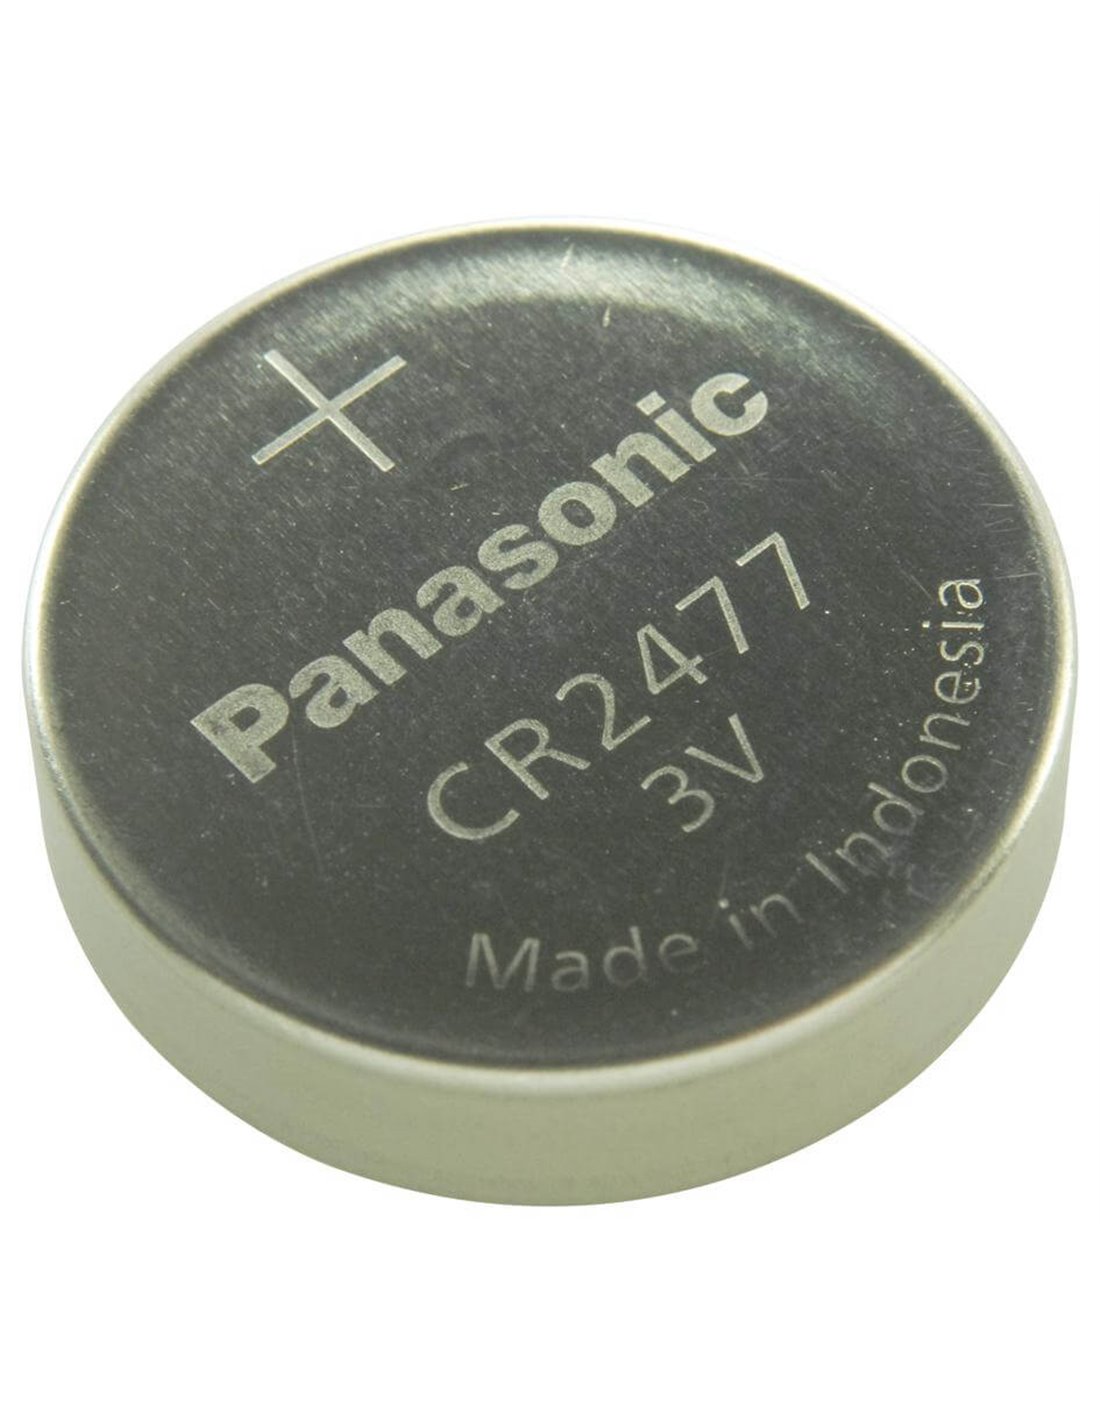 New Panasonic CR2477 Replacement batteries for ROTOR POWER CRANKS CR2477